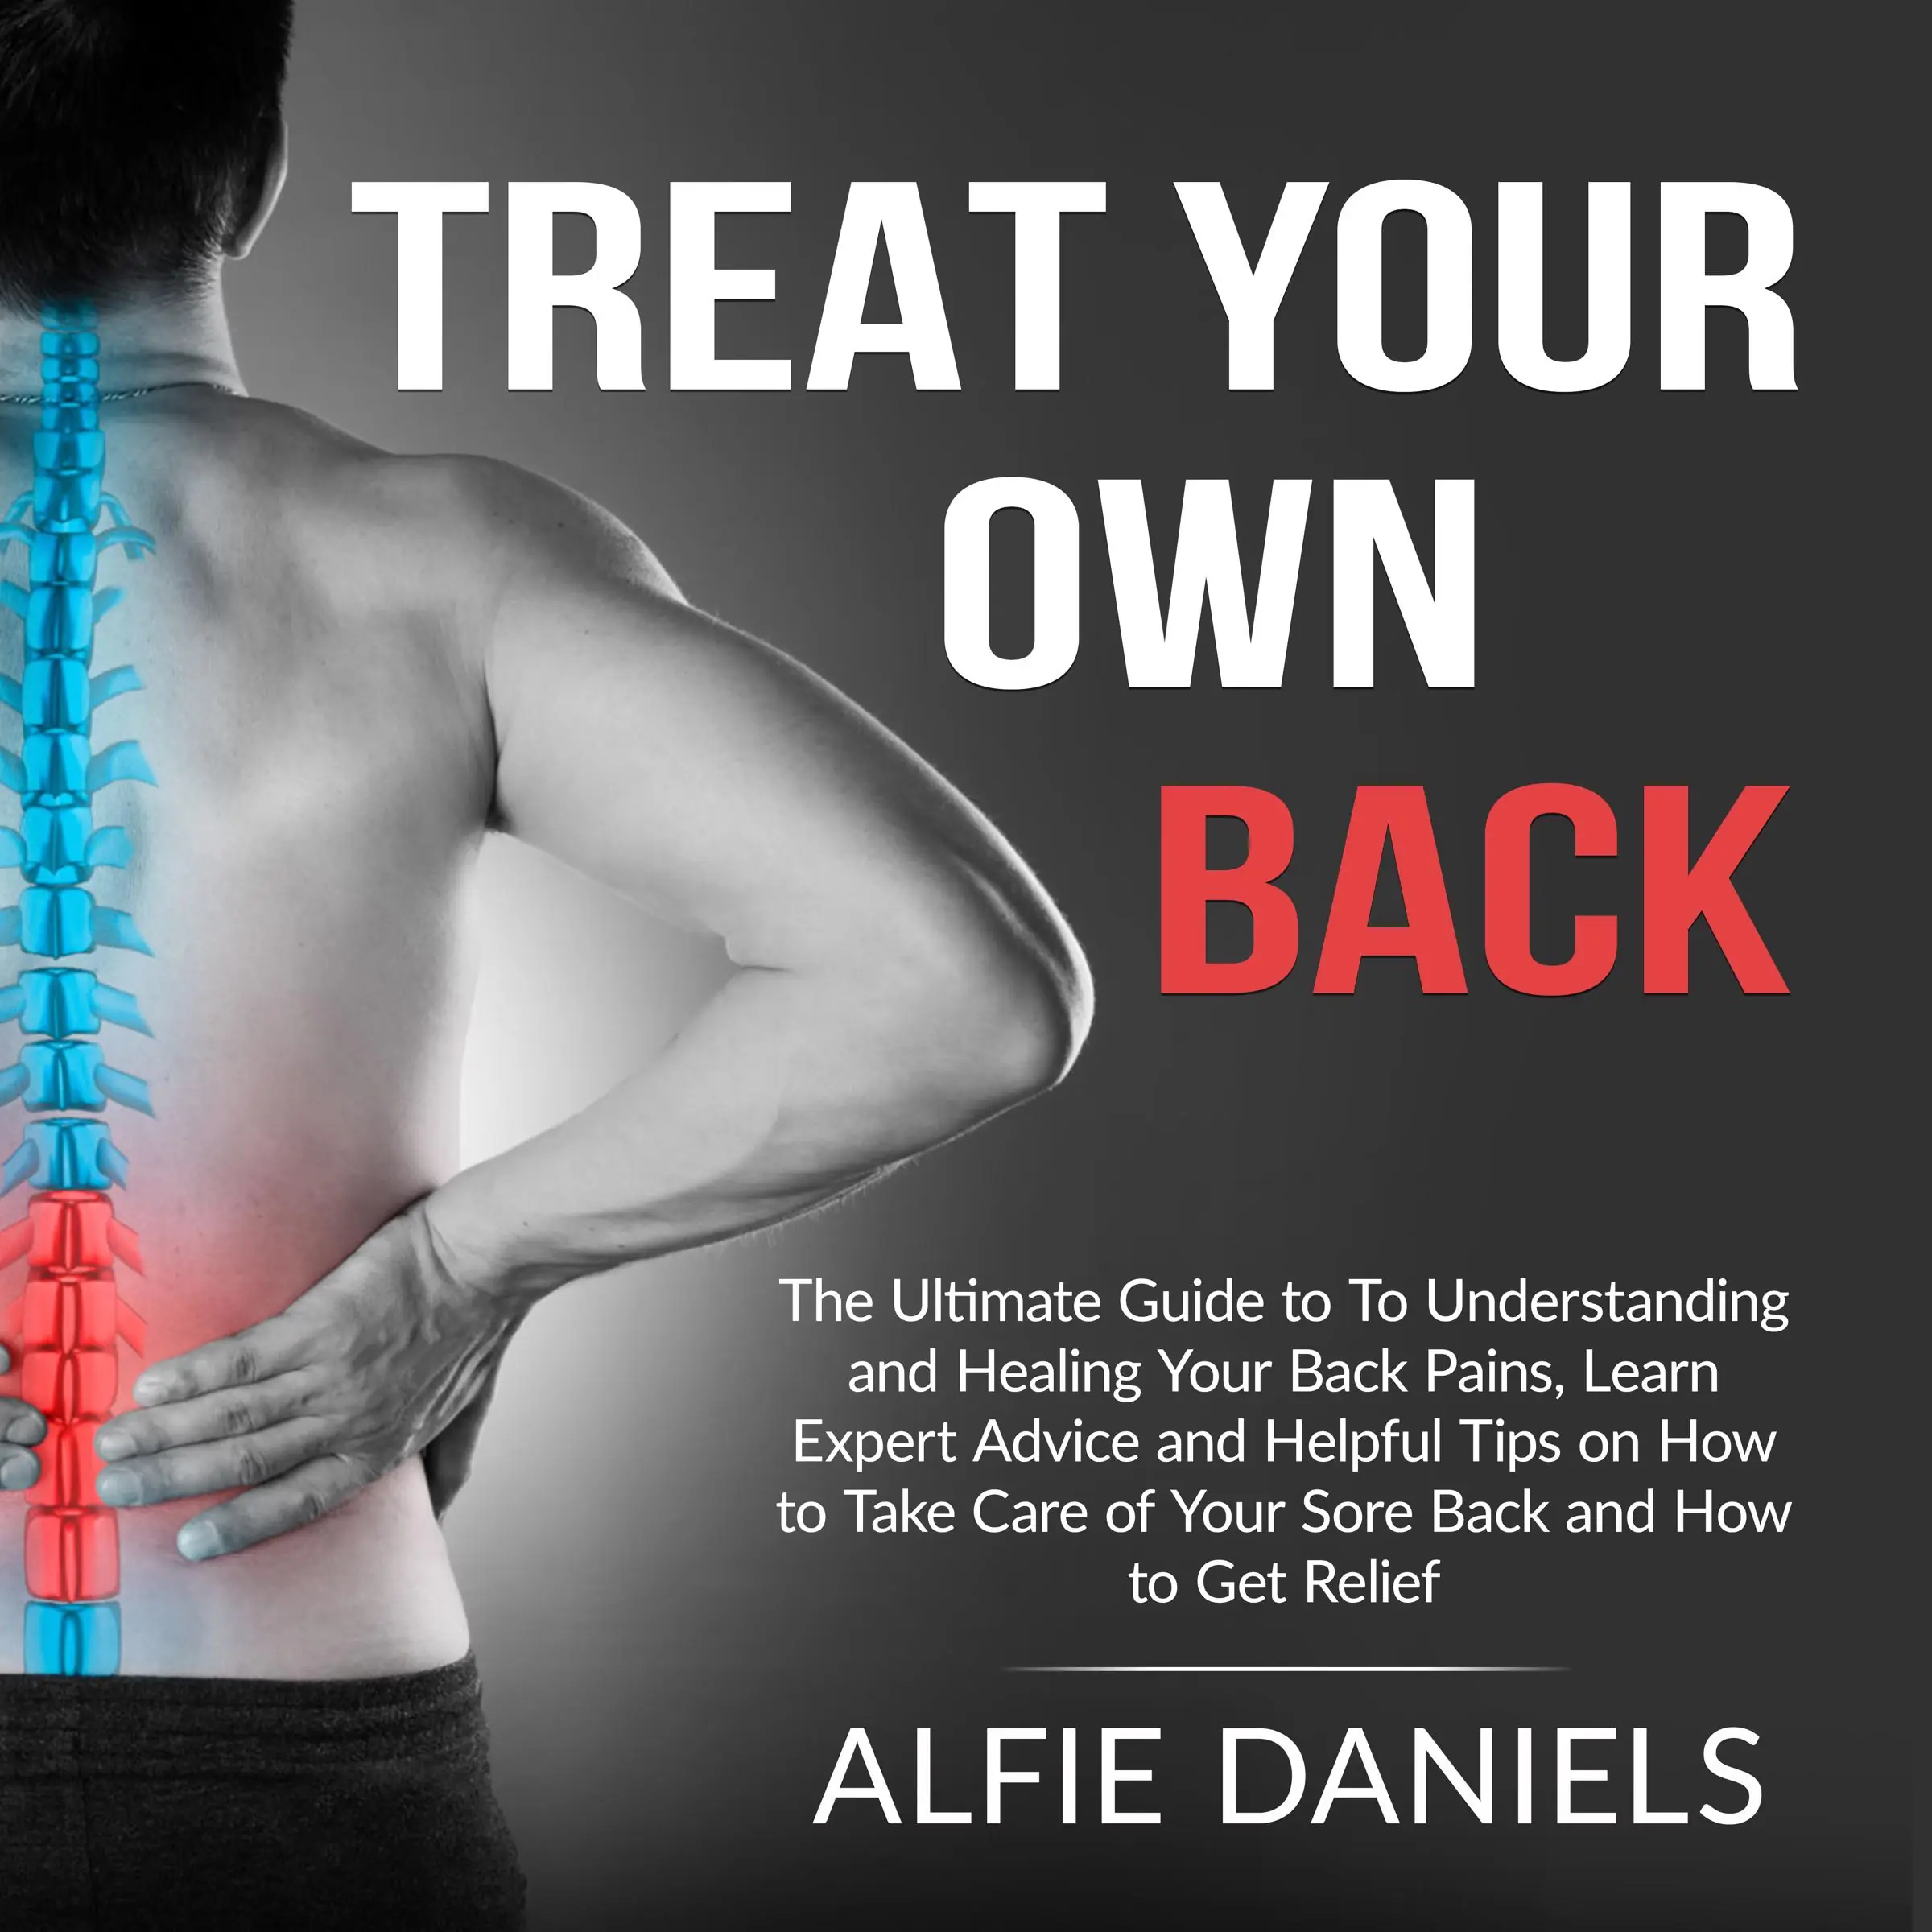 Treat Your Own Back: The Ultimate Guide to To Understanding and Healing Your Back Pains, Learn Expert Advice and Helpful Tips on How to Take Care of Your Sore Back and How to Get Relief by Alfie Daniels Audiobook